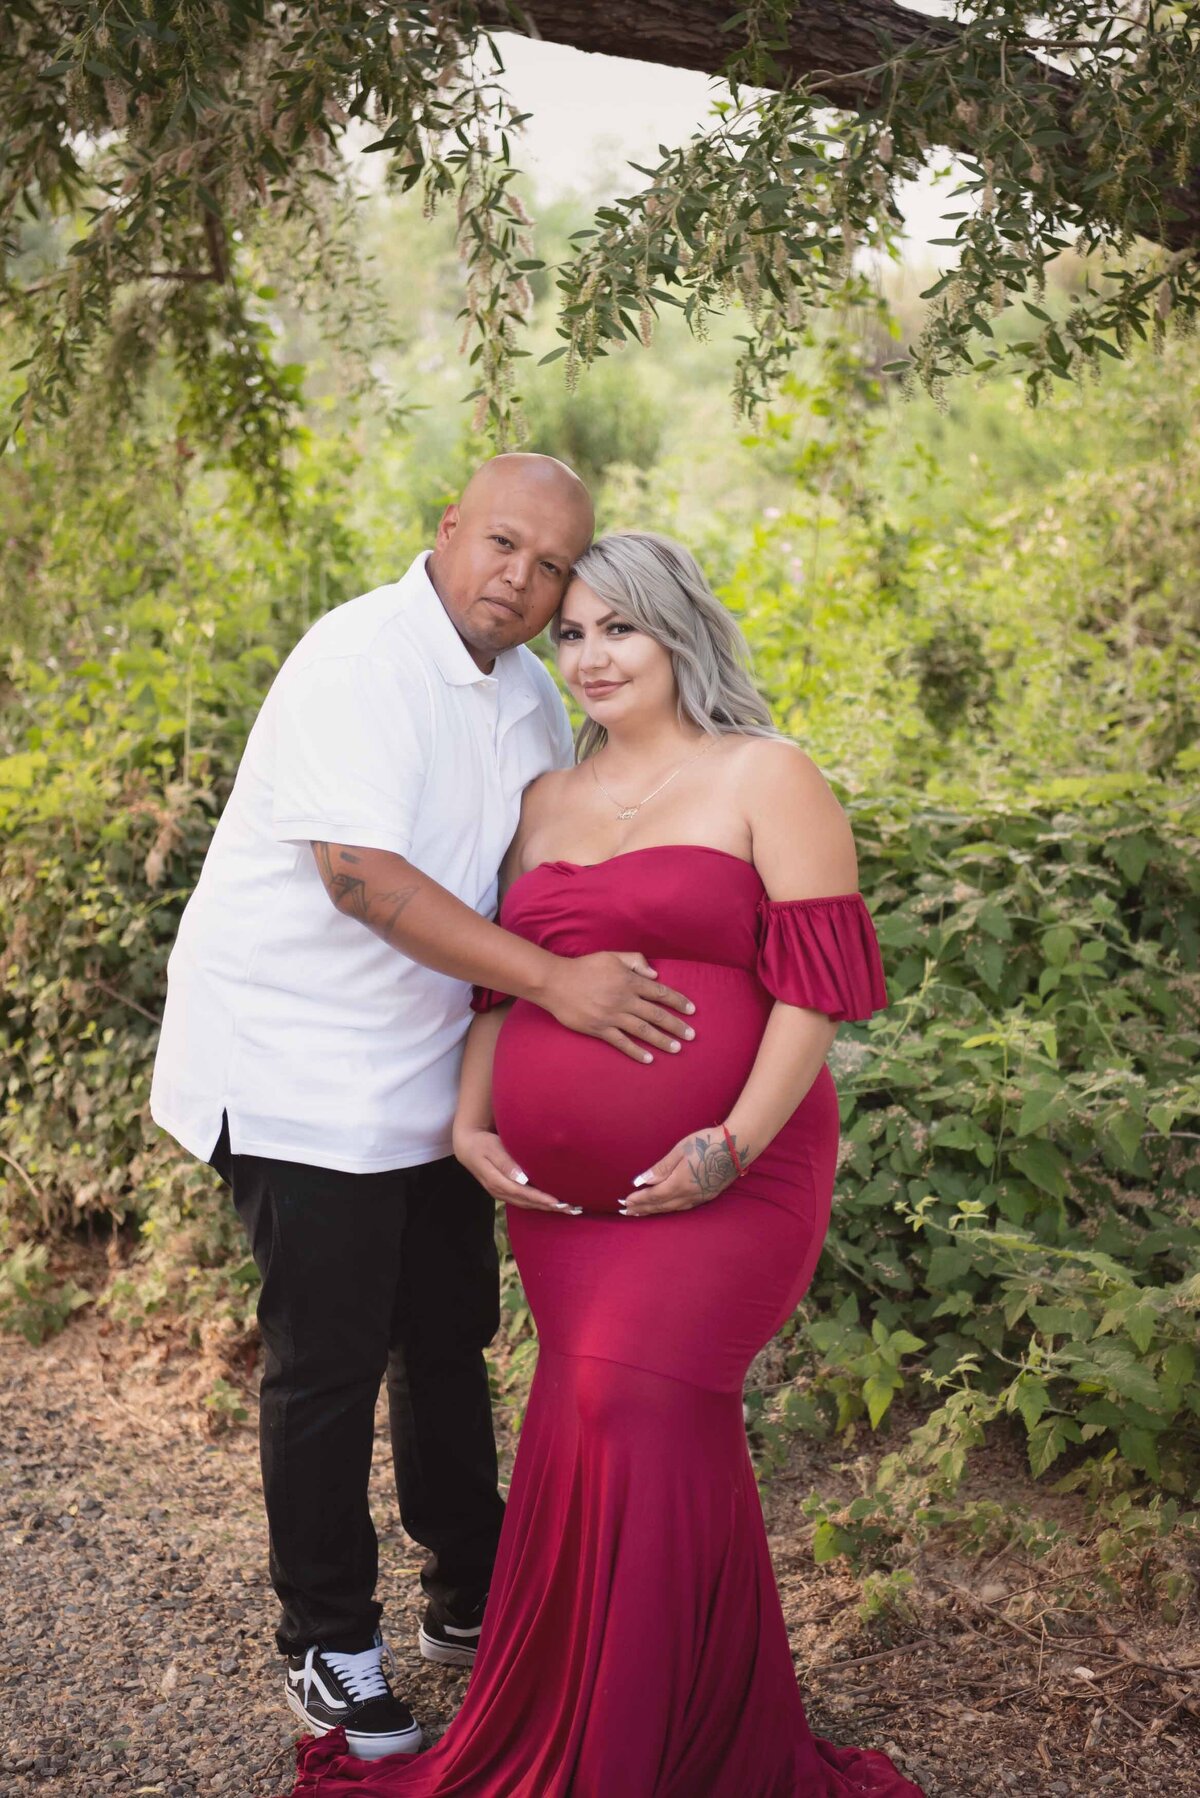 Expectant Mom and Dad in park smiling at camera and holding their baby bump. Mom is wearing a long, red maternity gown.